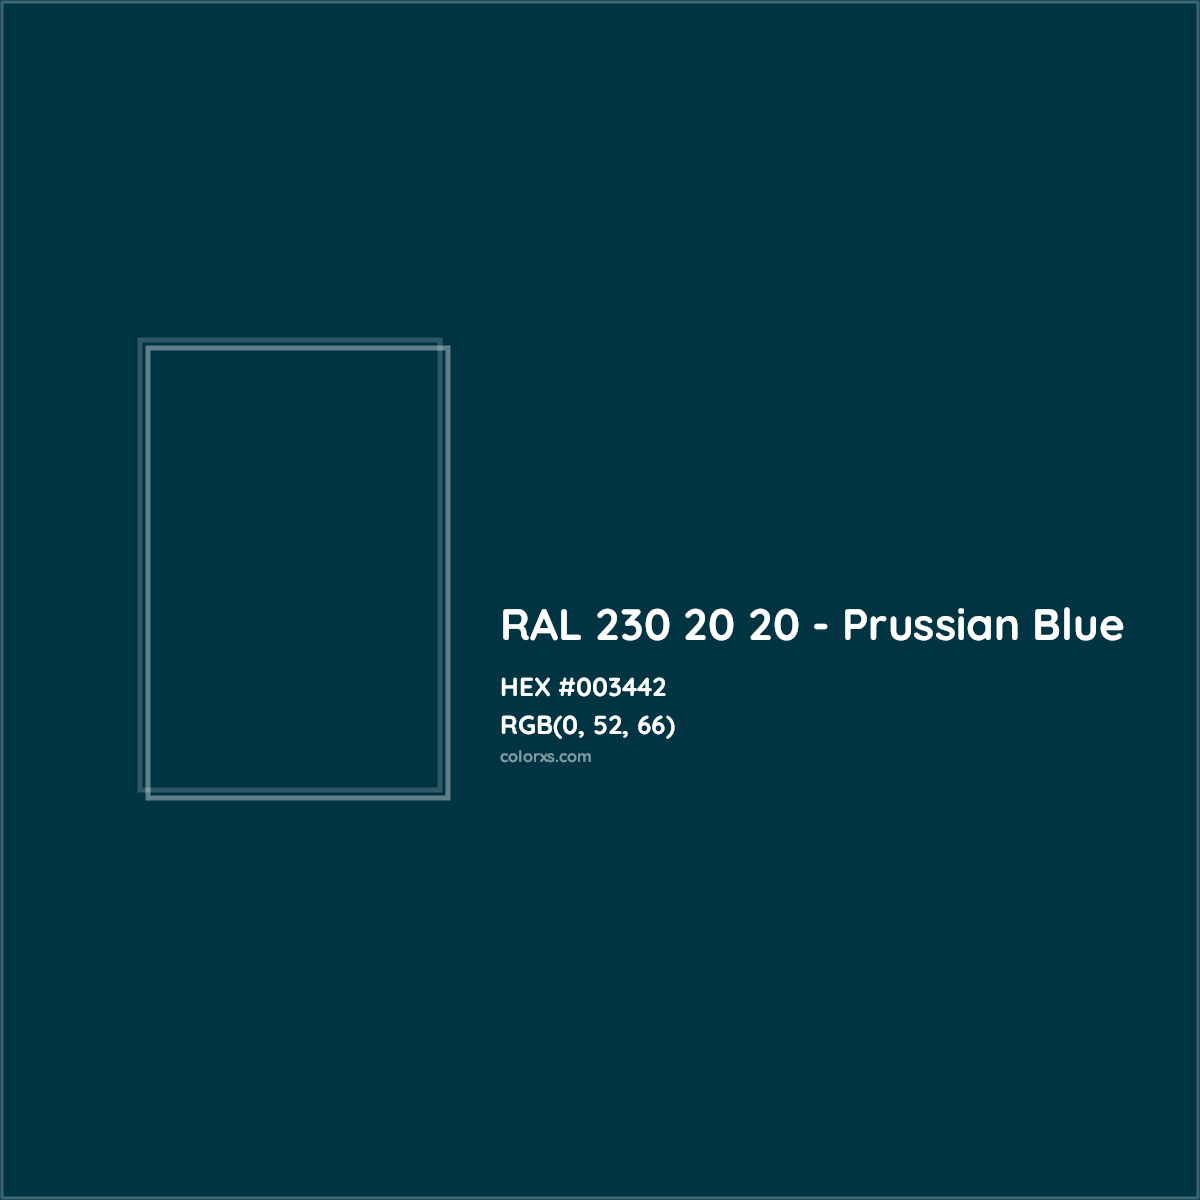 HEX #003442 RAL 230 20 20 - Prussian Blue CMS RAL Design - Color Code